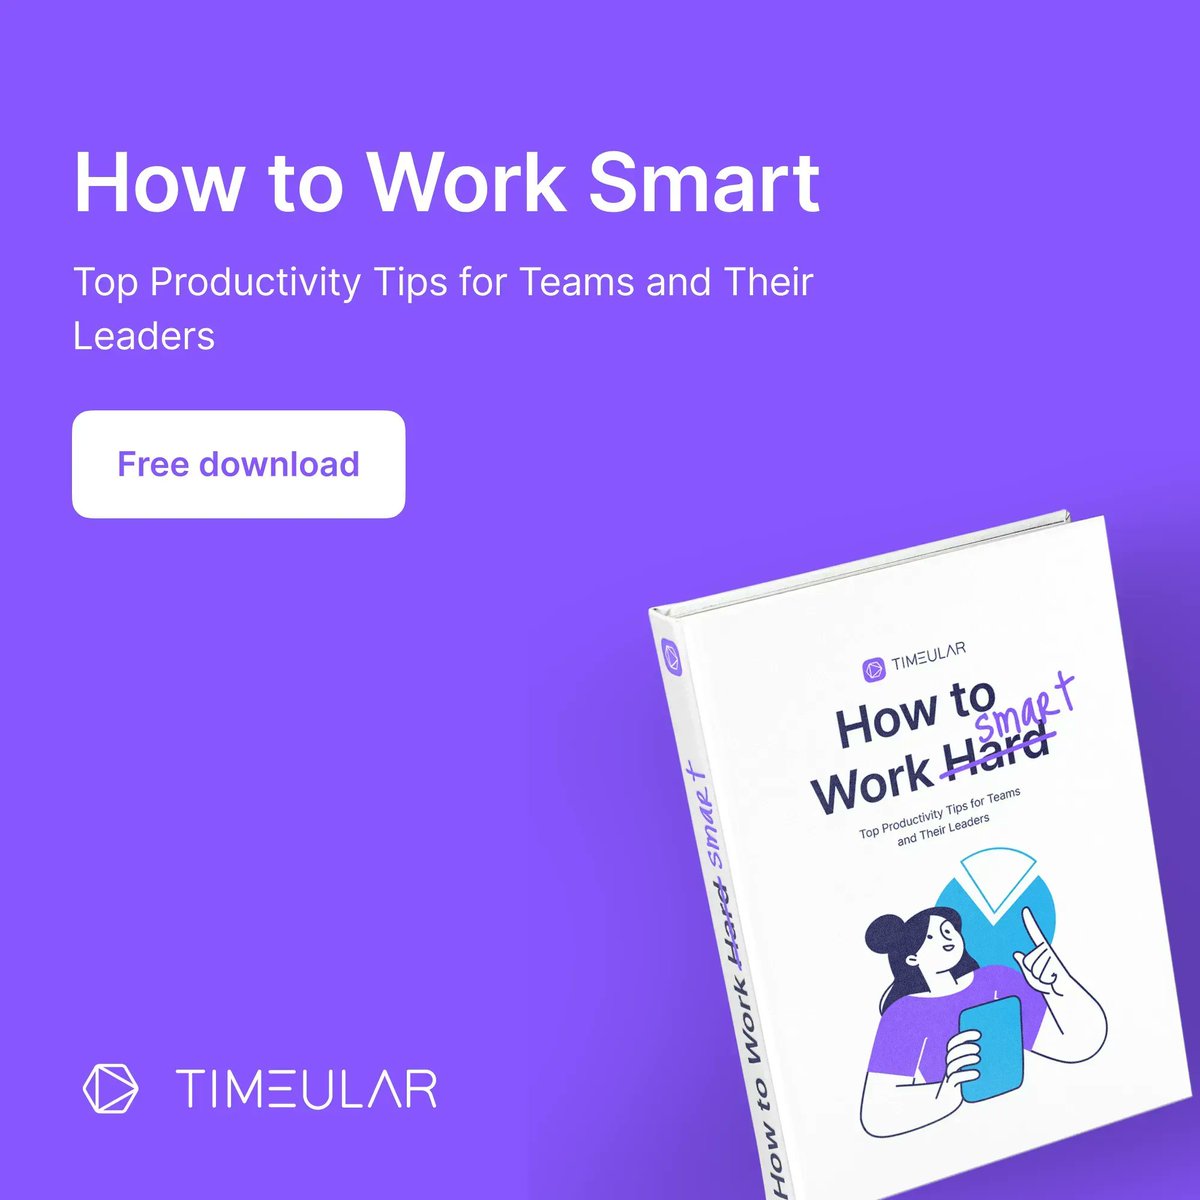 Learn all the Dos and Don'ts for Team Leaders to make the team more productive! Download the free eBook today: buff.ly/3ODUW2L #teamleader #teamwork #productivity